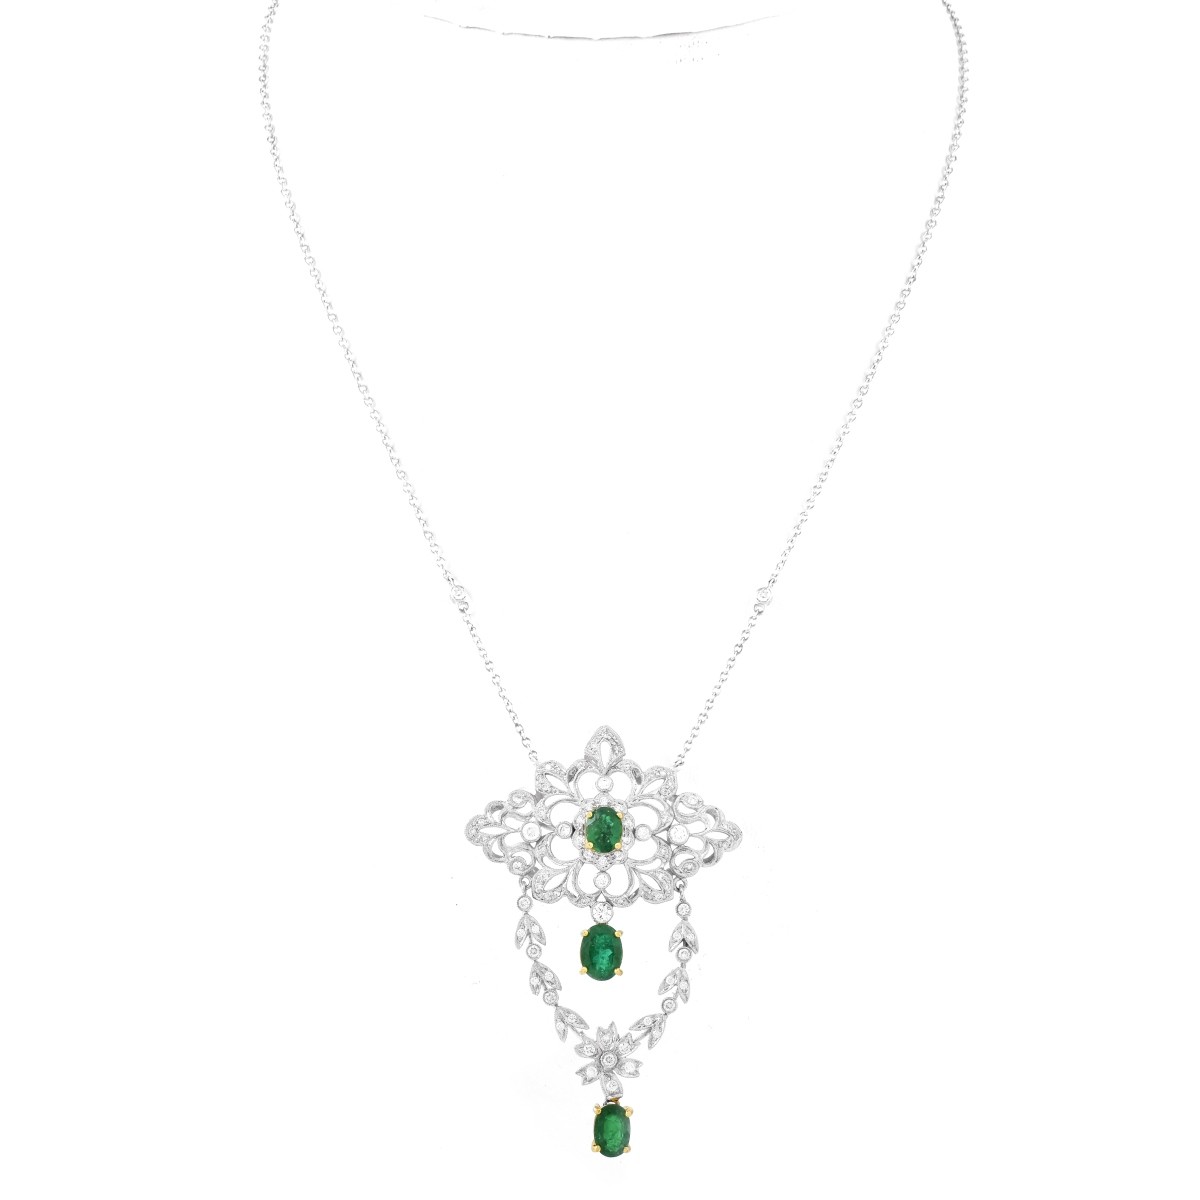 Emerald, Diamond and 18K Gold Necklace